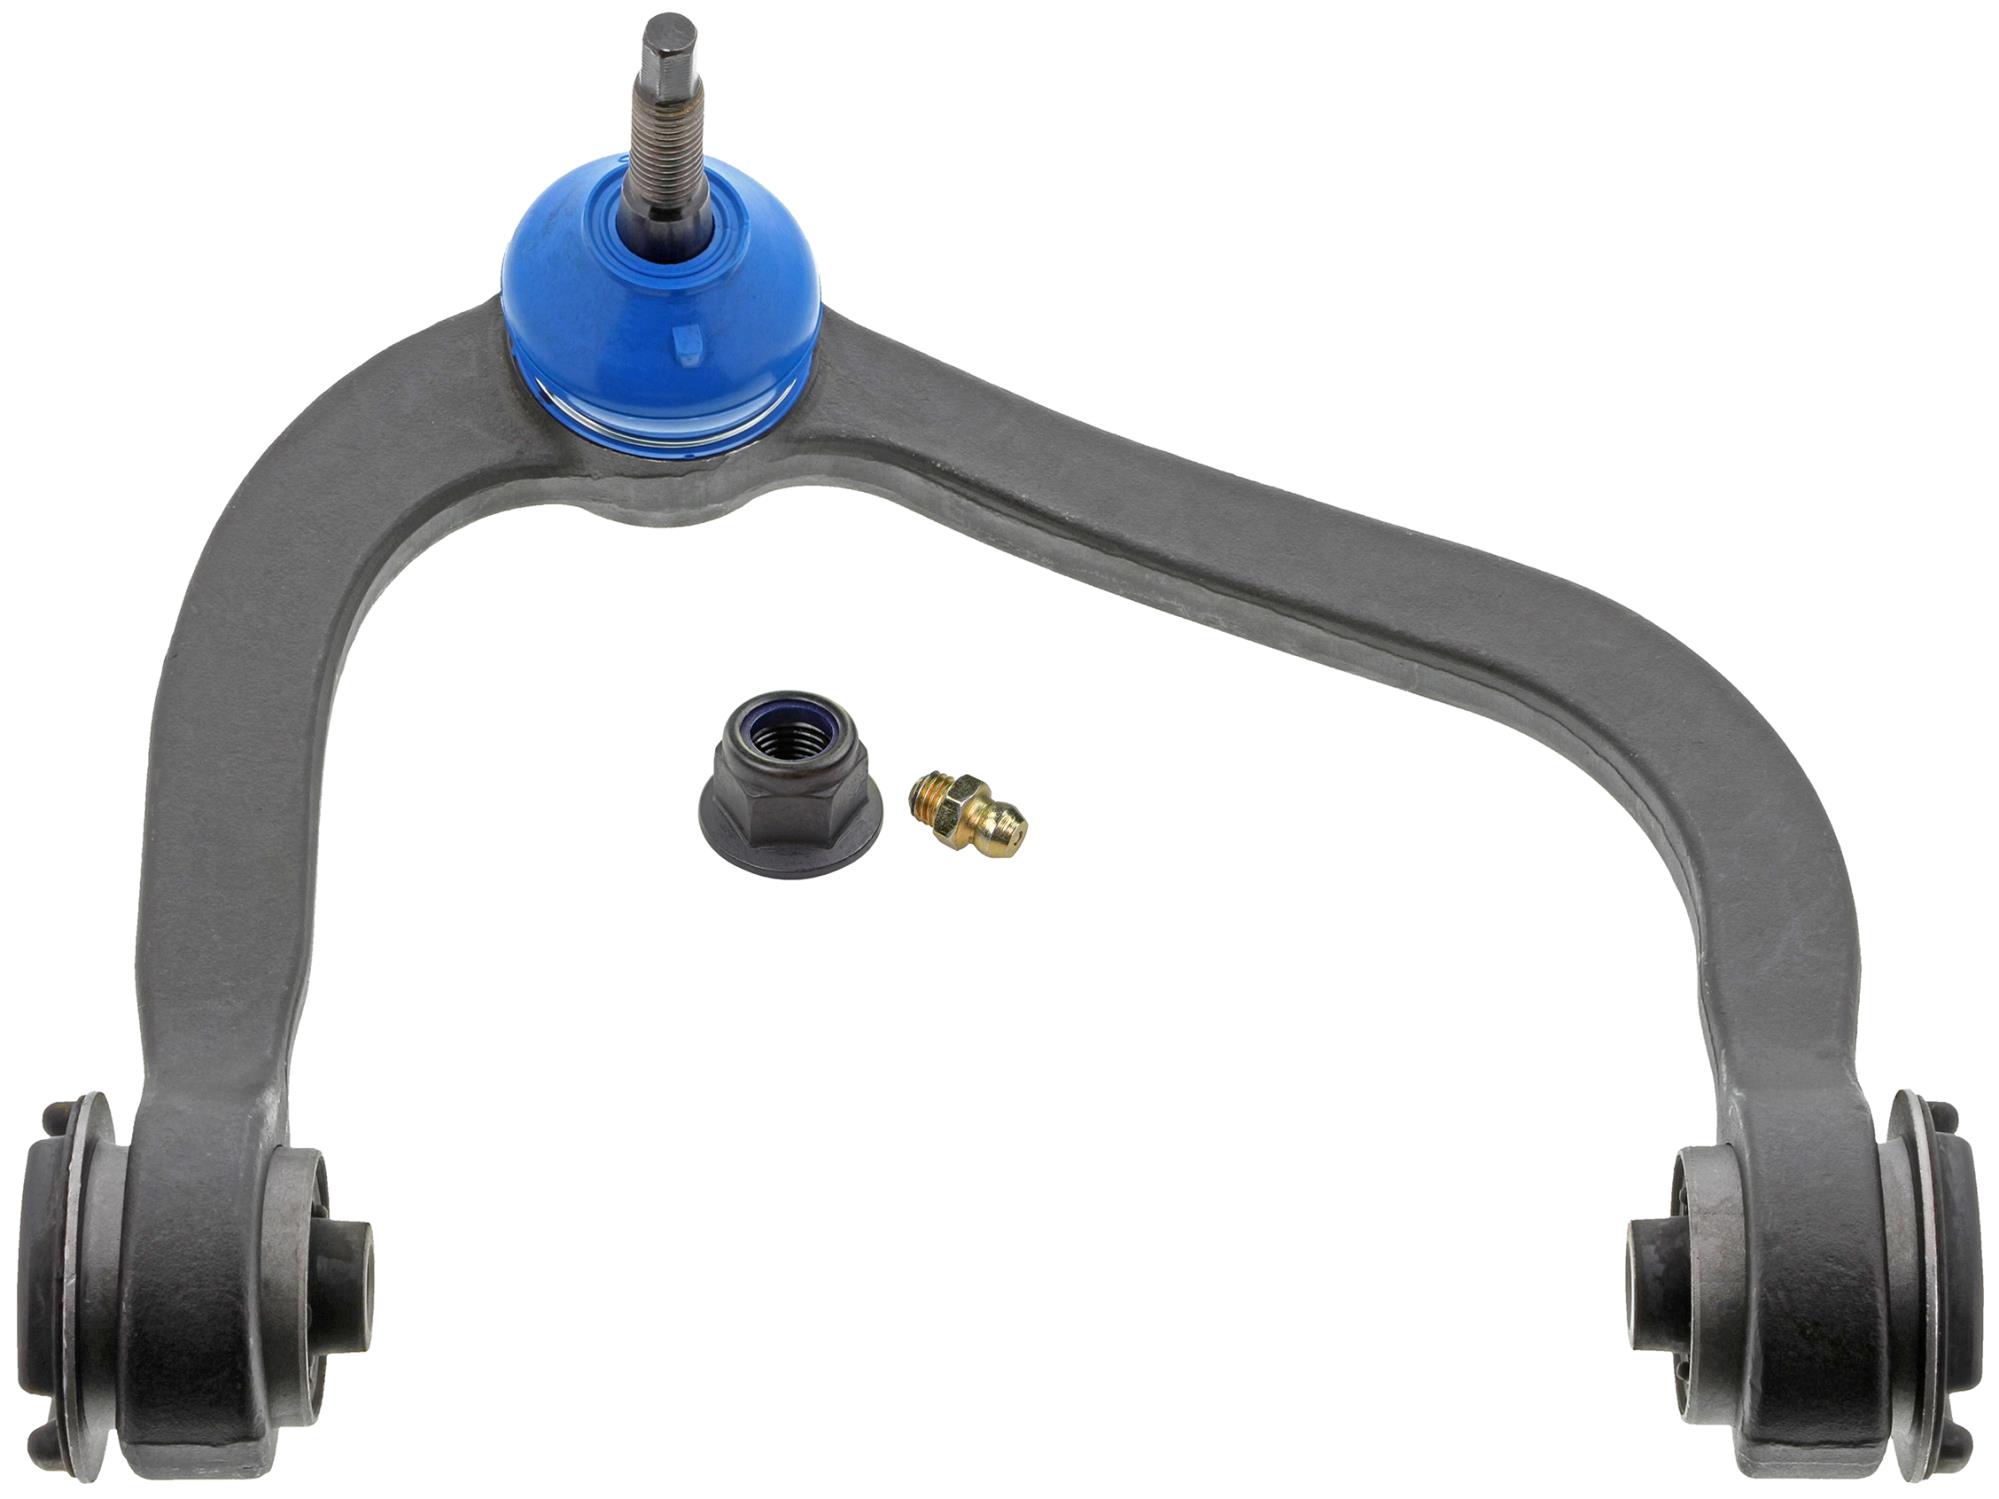 Shop perfect fitment Mevotech Supreme control arms from us at the best prices.